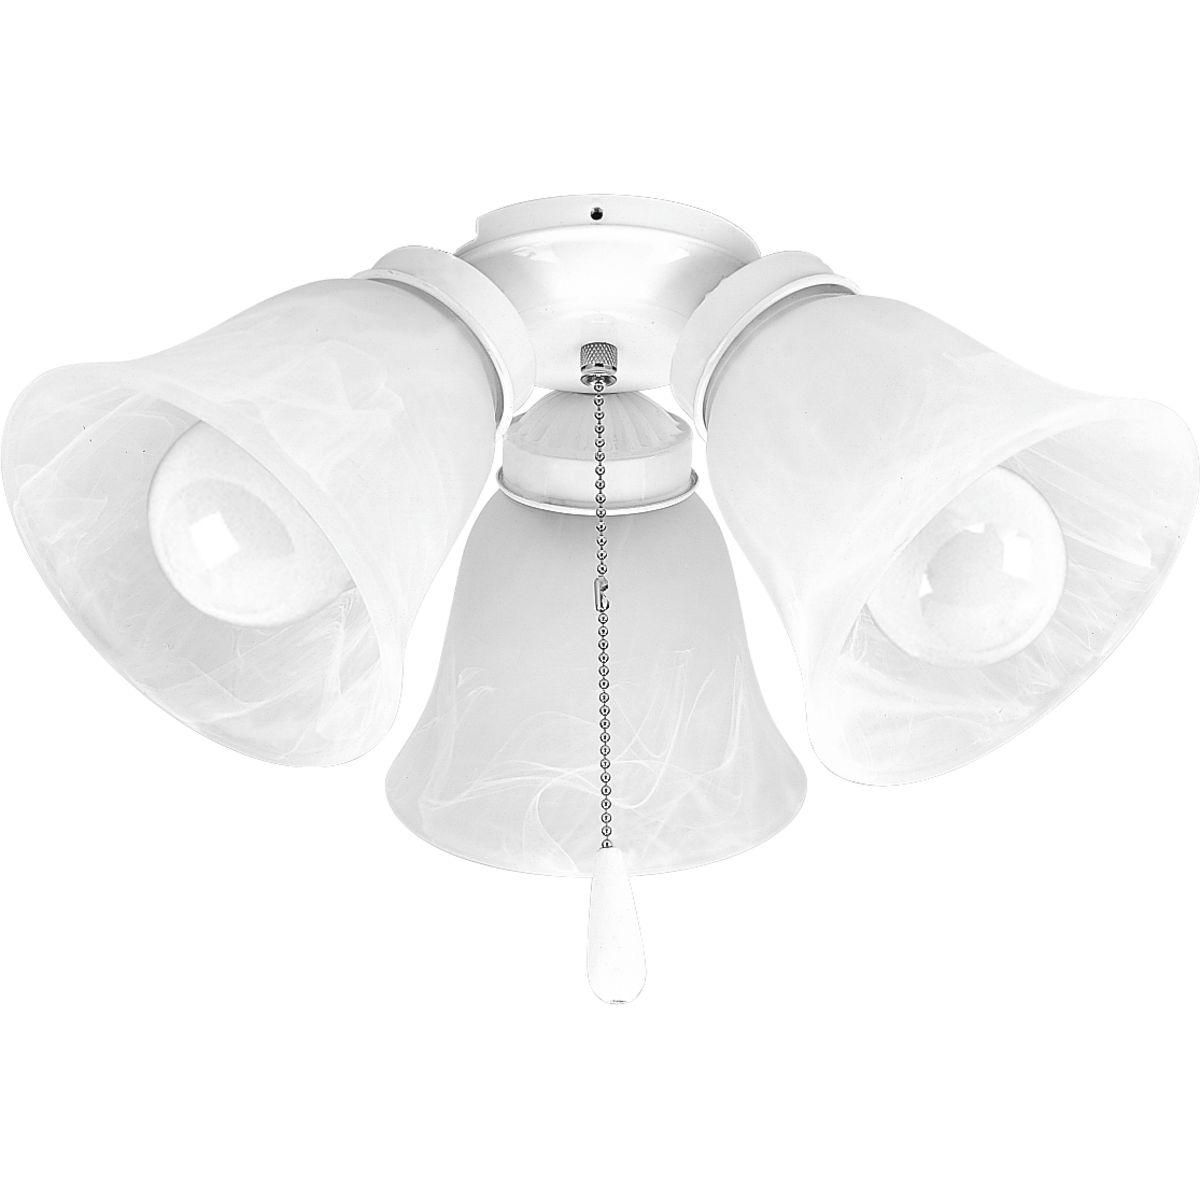 Hubbell P2600-30WB Three-light kit with white washed alabaster style glass shades beautiful in design. White finish corresponds with a chrome pull-chain and white fob. Innovative spring clip glass attachment system eliminates unsightly excess hardware. Good for use with P25